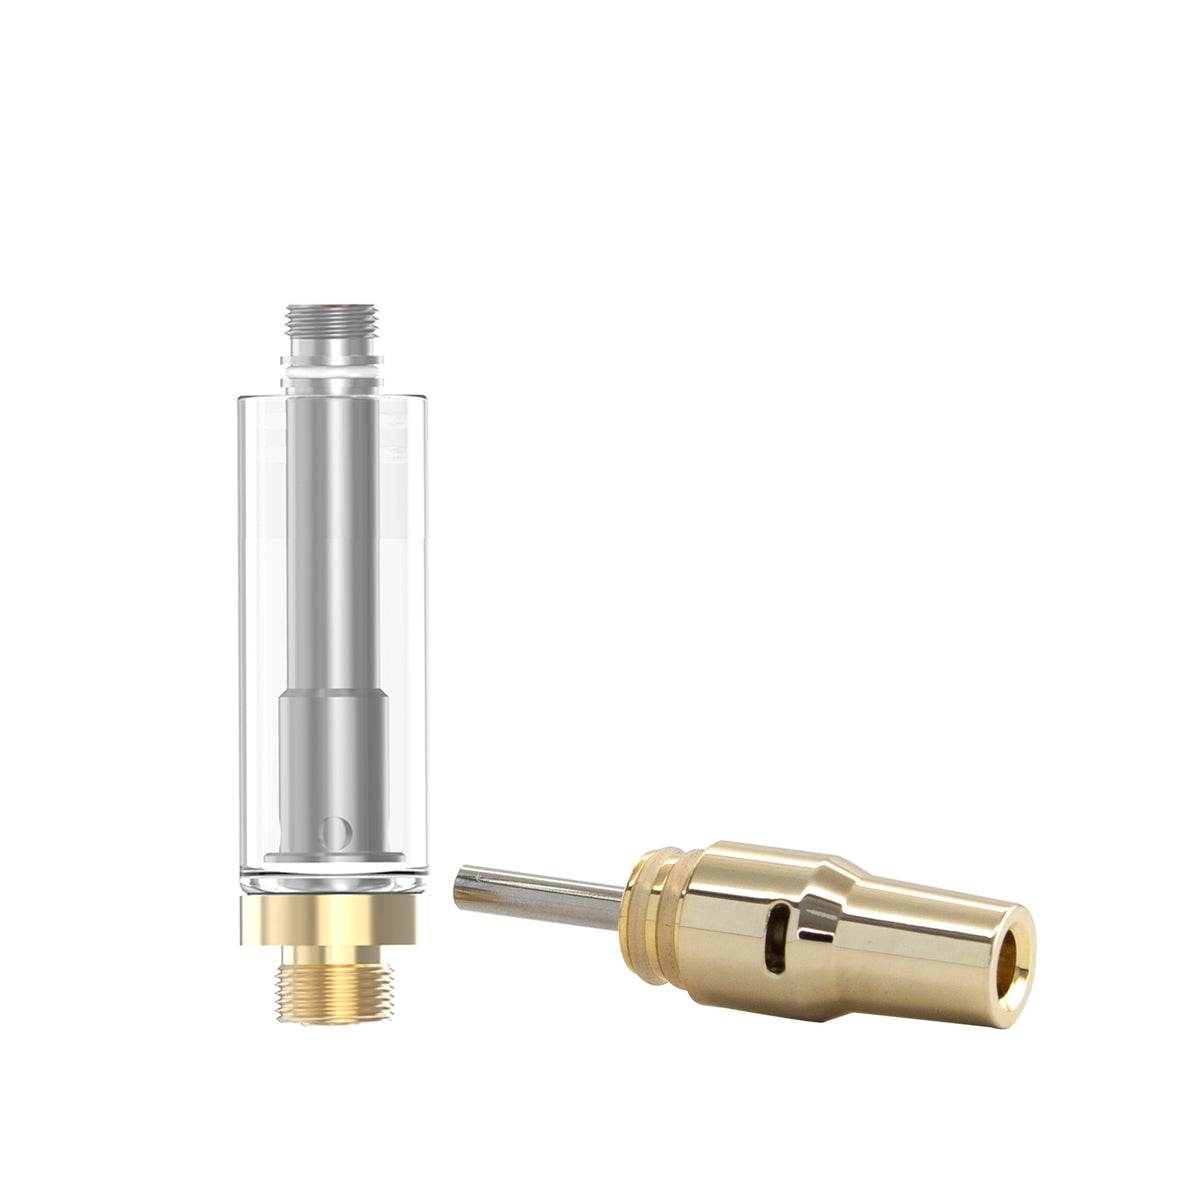 V-15 Ceramic core Gold 510 Cartridge Screw on - 100 Units (10% discount on full carton of 1000; applied automatically).